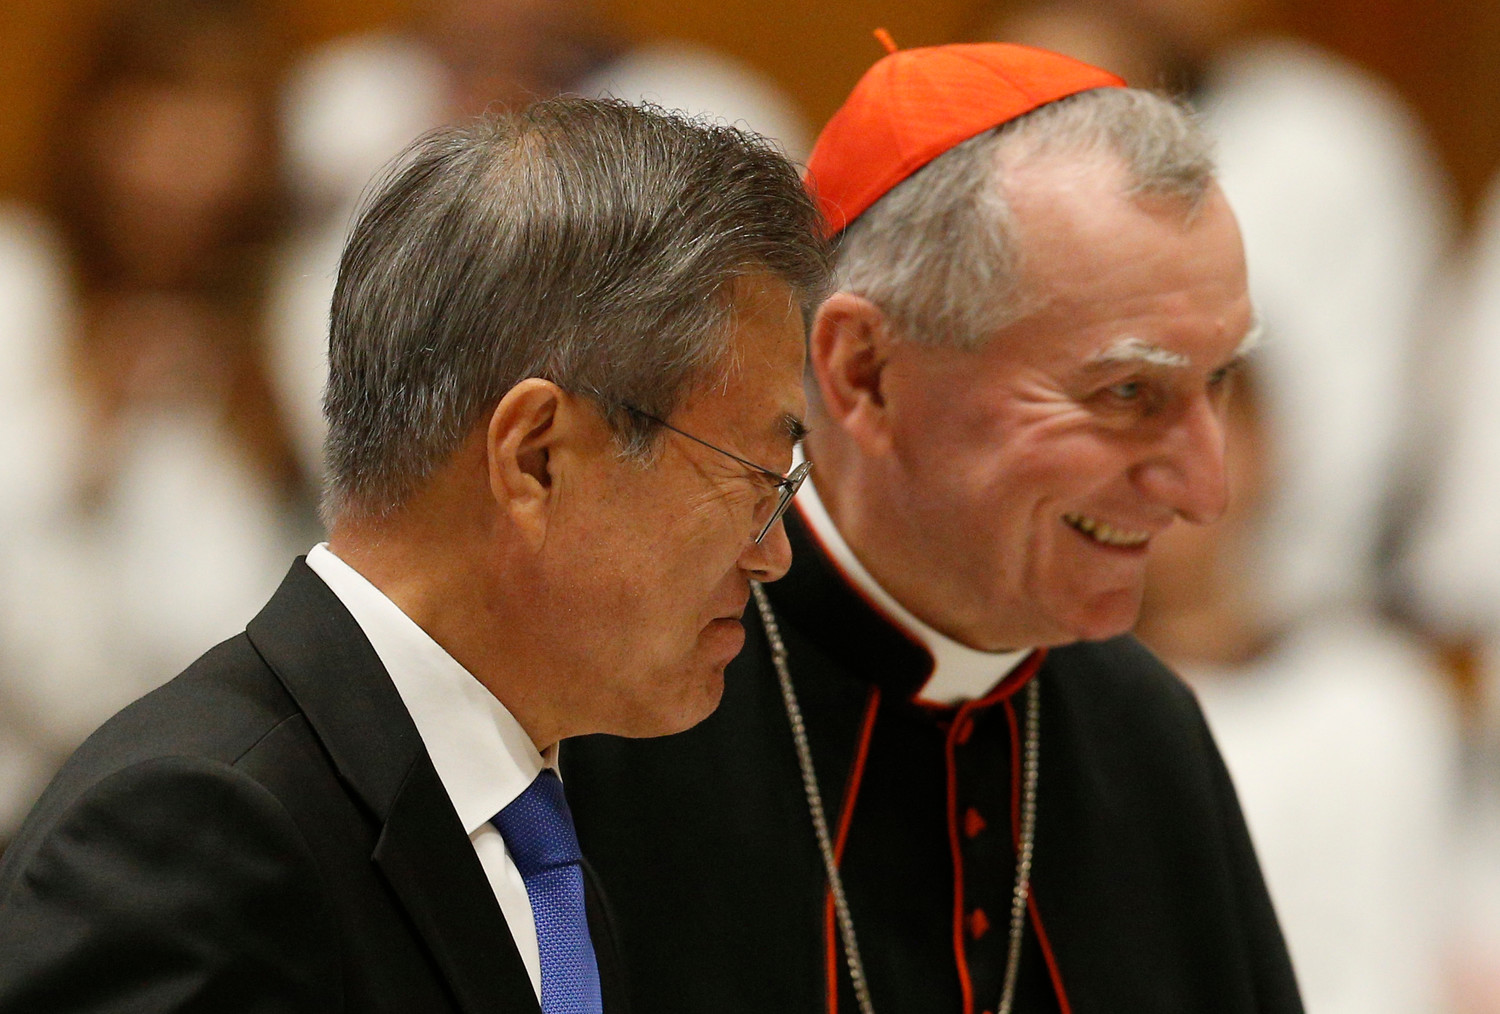 South Korean President Moon Jae-in walks next to Cardinal Pietro Parolin, Vatican secretary of state, as he prepares to speak after a Mass for peace for the Korean peninsula in St. Peter’s Basilica at the Vatican Oct. 17.